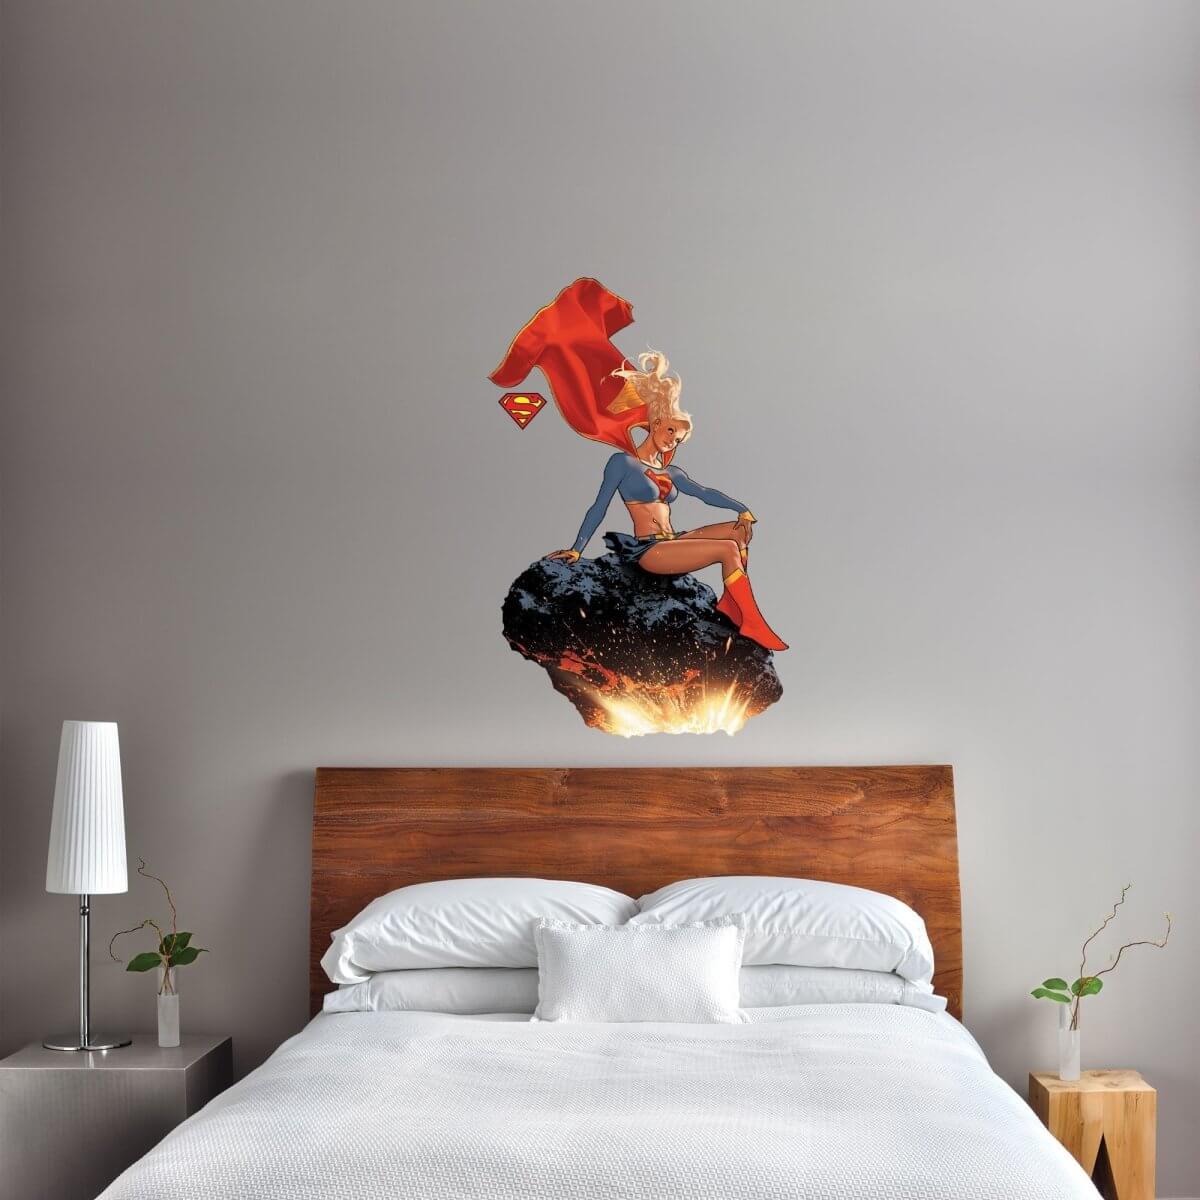 Kismet Decals Supergirl and the LoSH #23 Comic Cover Series Licensed Wall Sticker - Easy DIY Home & Room Decor Wall Art - Kismet Decals